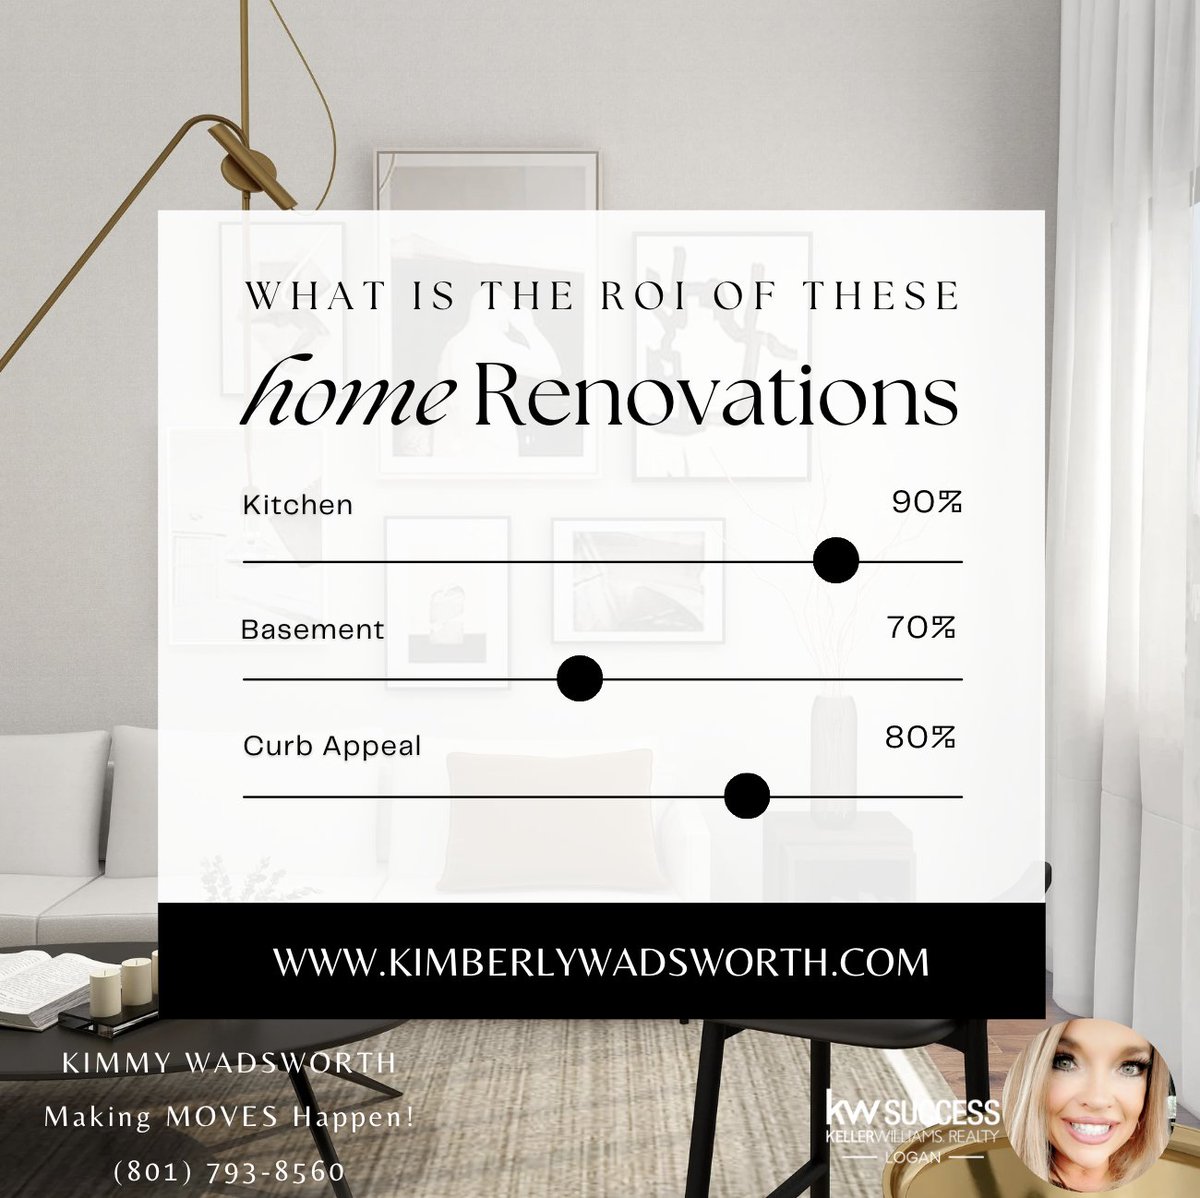 Wondering what the best ROI is for your home renovations? Check it out! ❤️

#utahrealestateagent #utahrealtor #utahhousing #utahhomesforsale #utahhomebuyers #utahdreamhome #northernutah #cachevalley #northernutahhomesforsale #utahhomes #realtor #utahlife #utahisrad